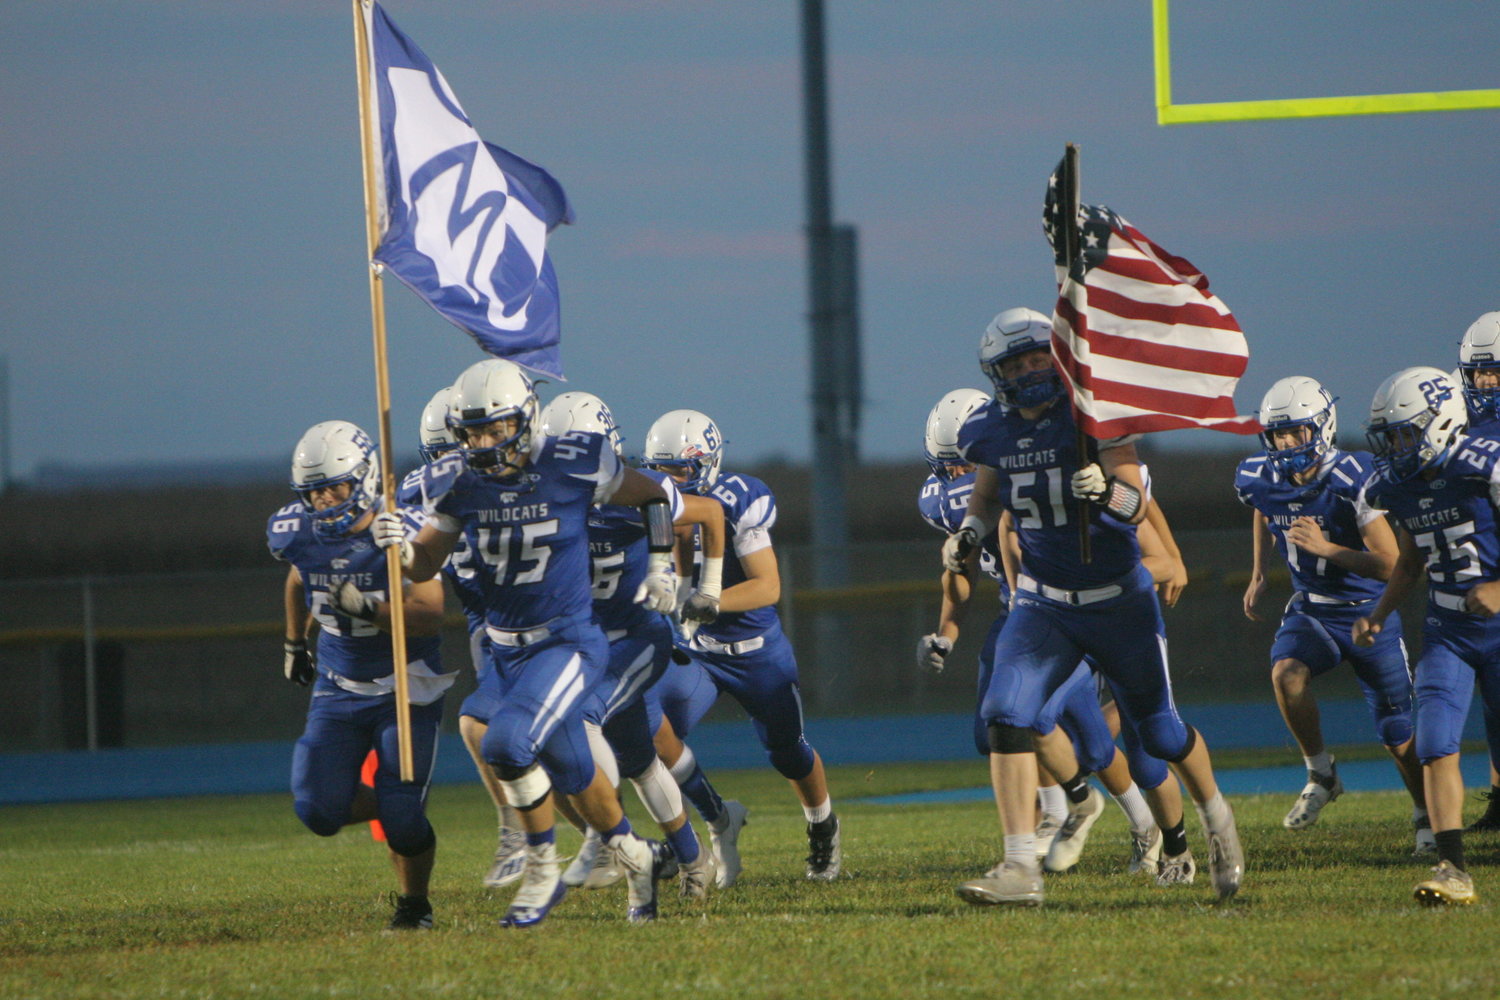 The Montgomery County football team charges to the field before its game against Greenville (Ill.) on Oct. 1. Thomas Klekamp (45) is holding the MCHS flag and Evan Abercrombie (51) is holding the American flag.